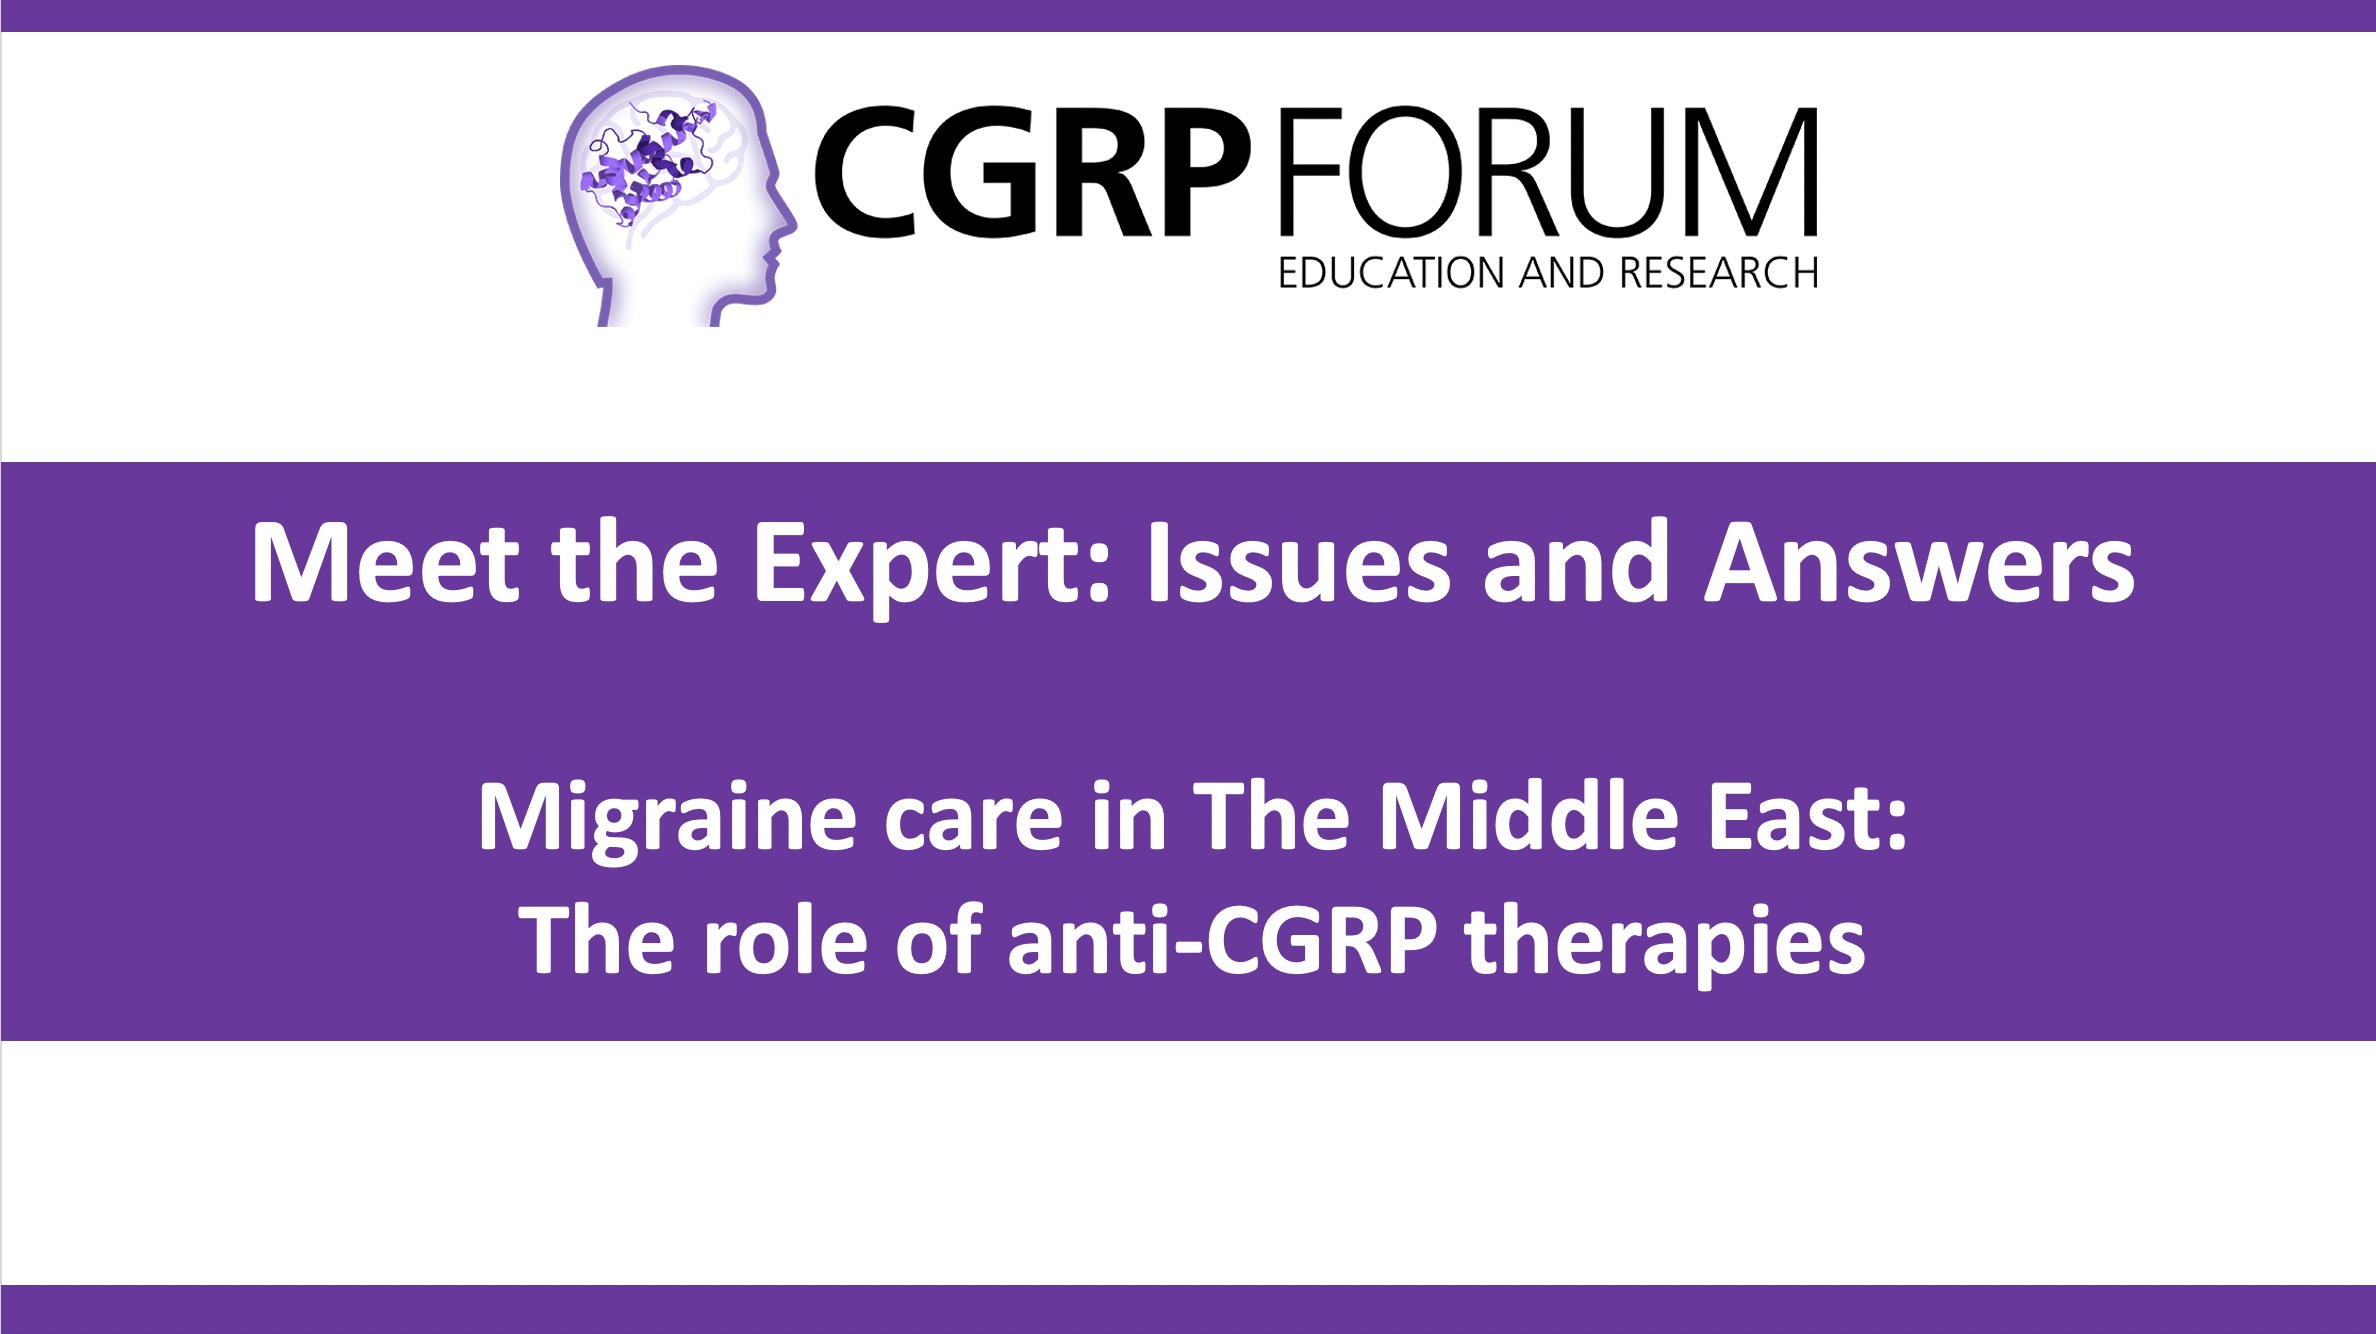 Migraine care in the Middle East: the role of anti-CGRP therapies